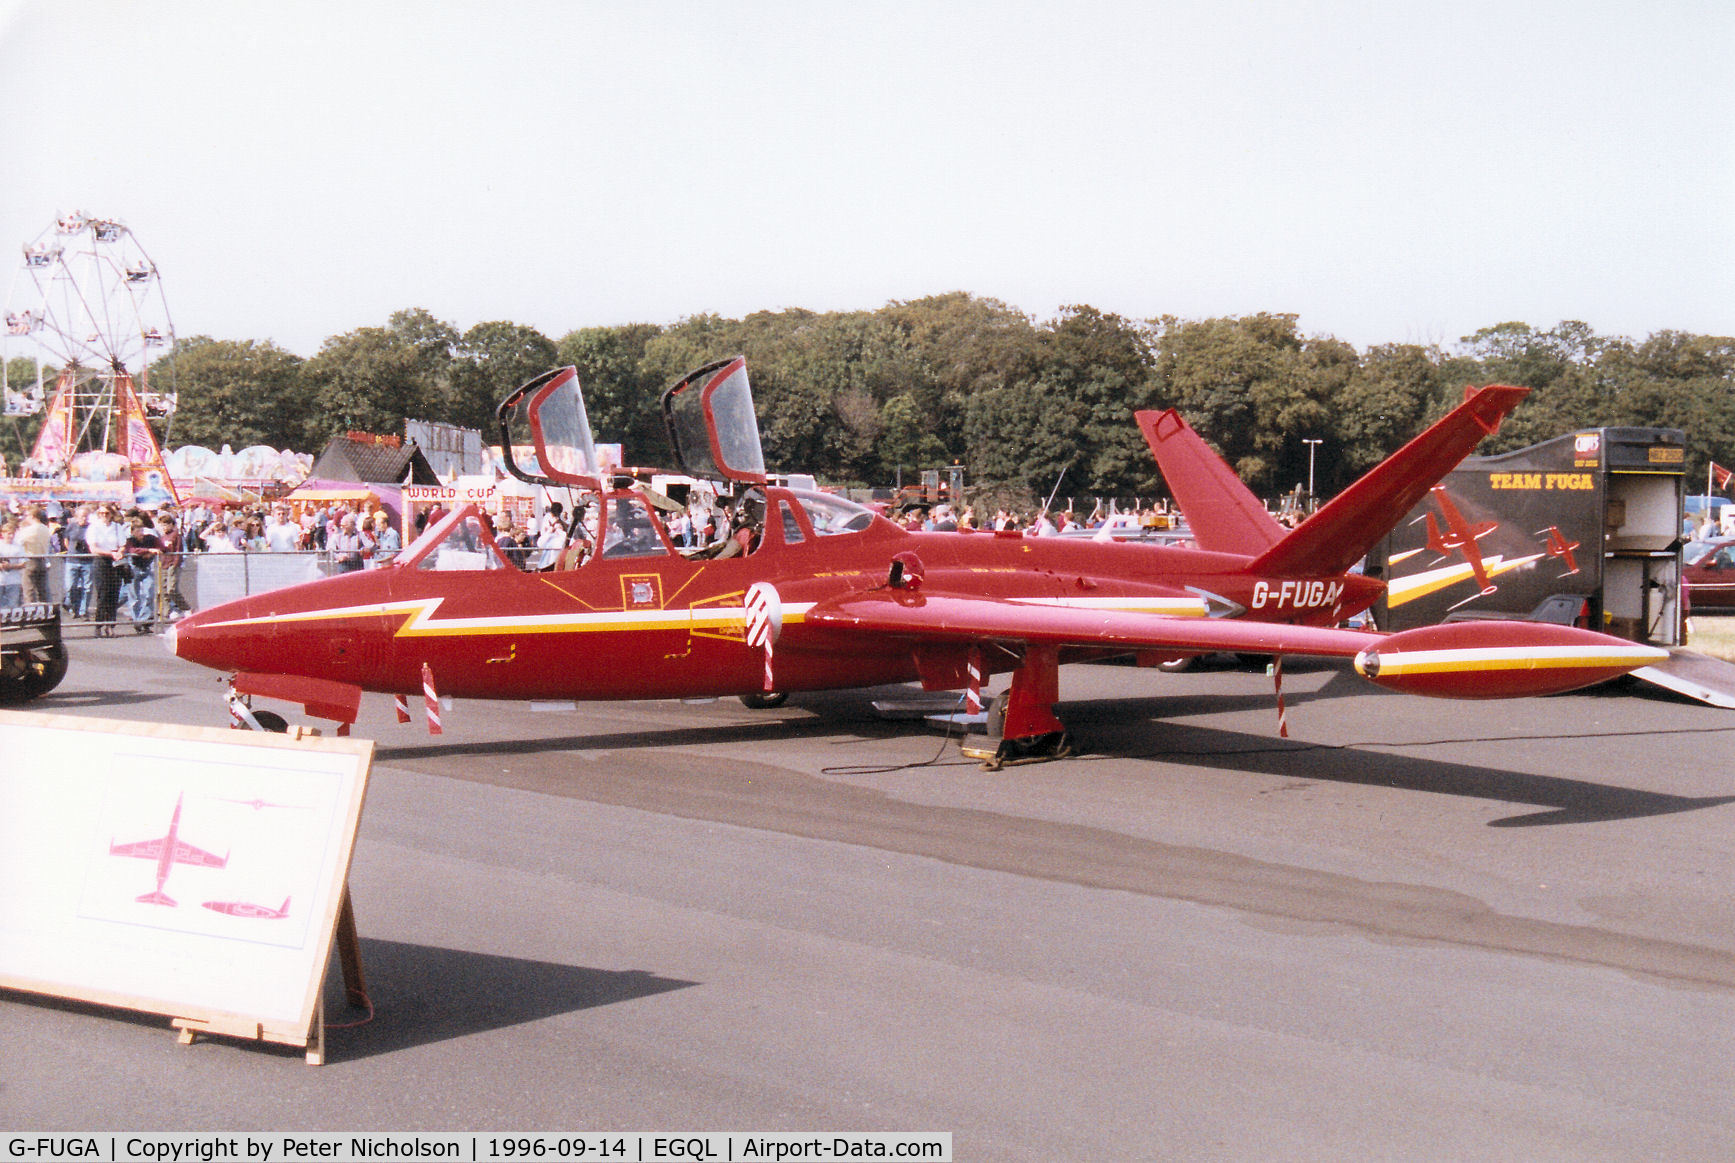 G-FUGA, 1957 Fouga CM-170R Magister C/N 045, CM-170 Magister in Belgian Air Force Red Devils aerobatic displeay team colours on display at the 1996 RAF Leuchars Airshow.